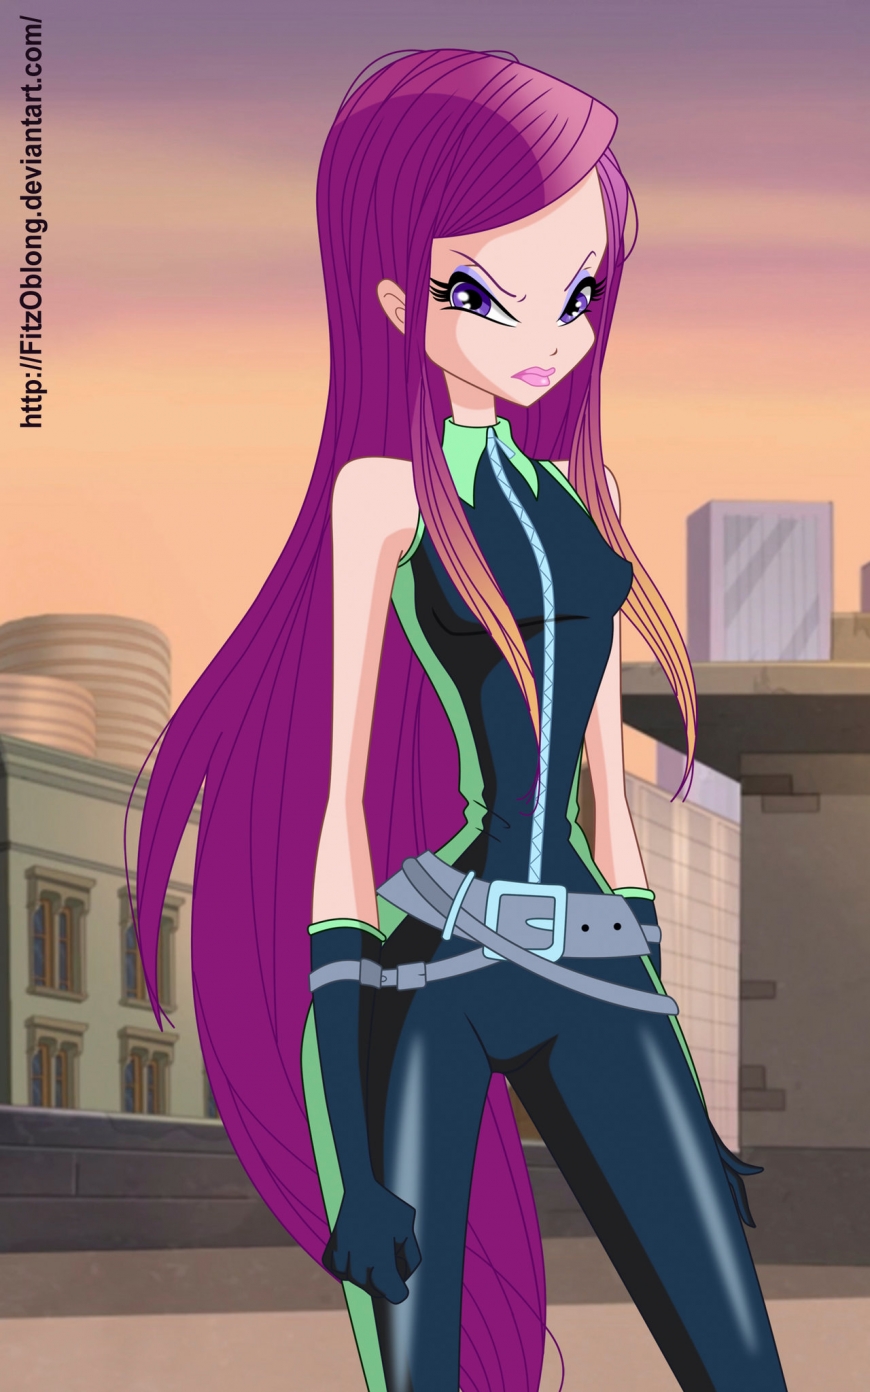 Roxy from World of Winx in spy outfit